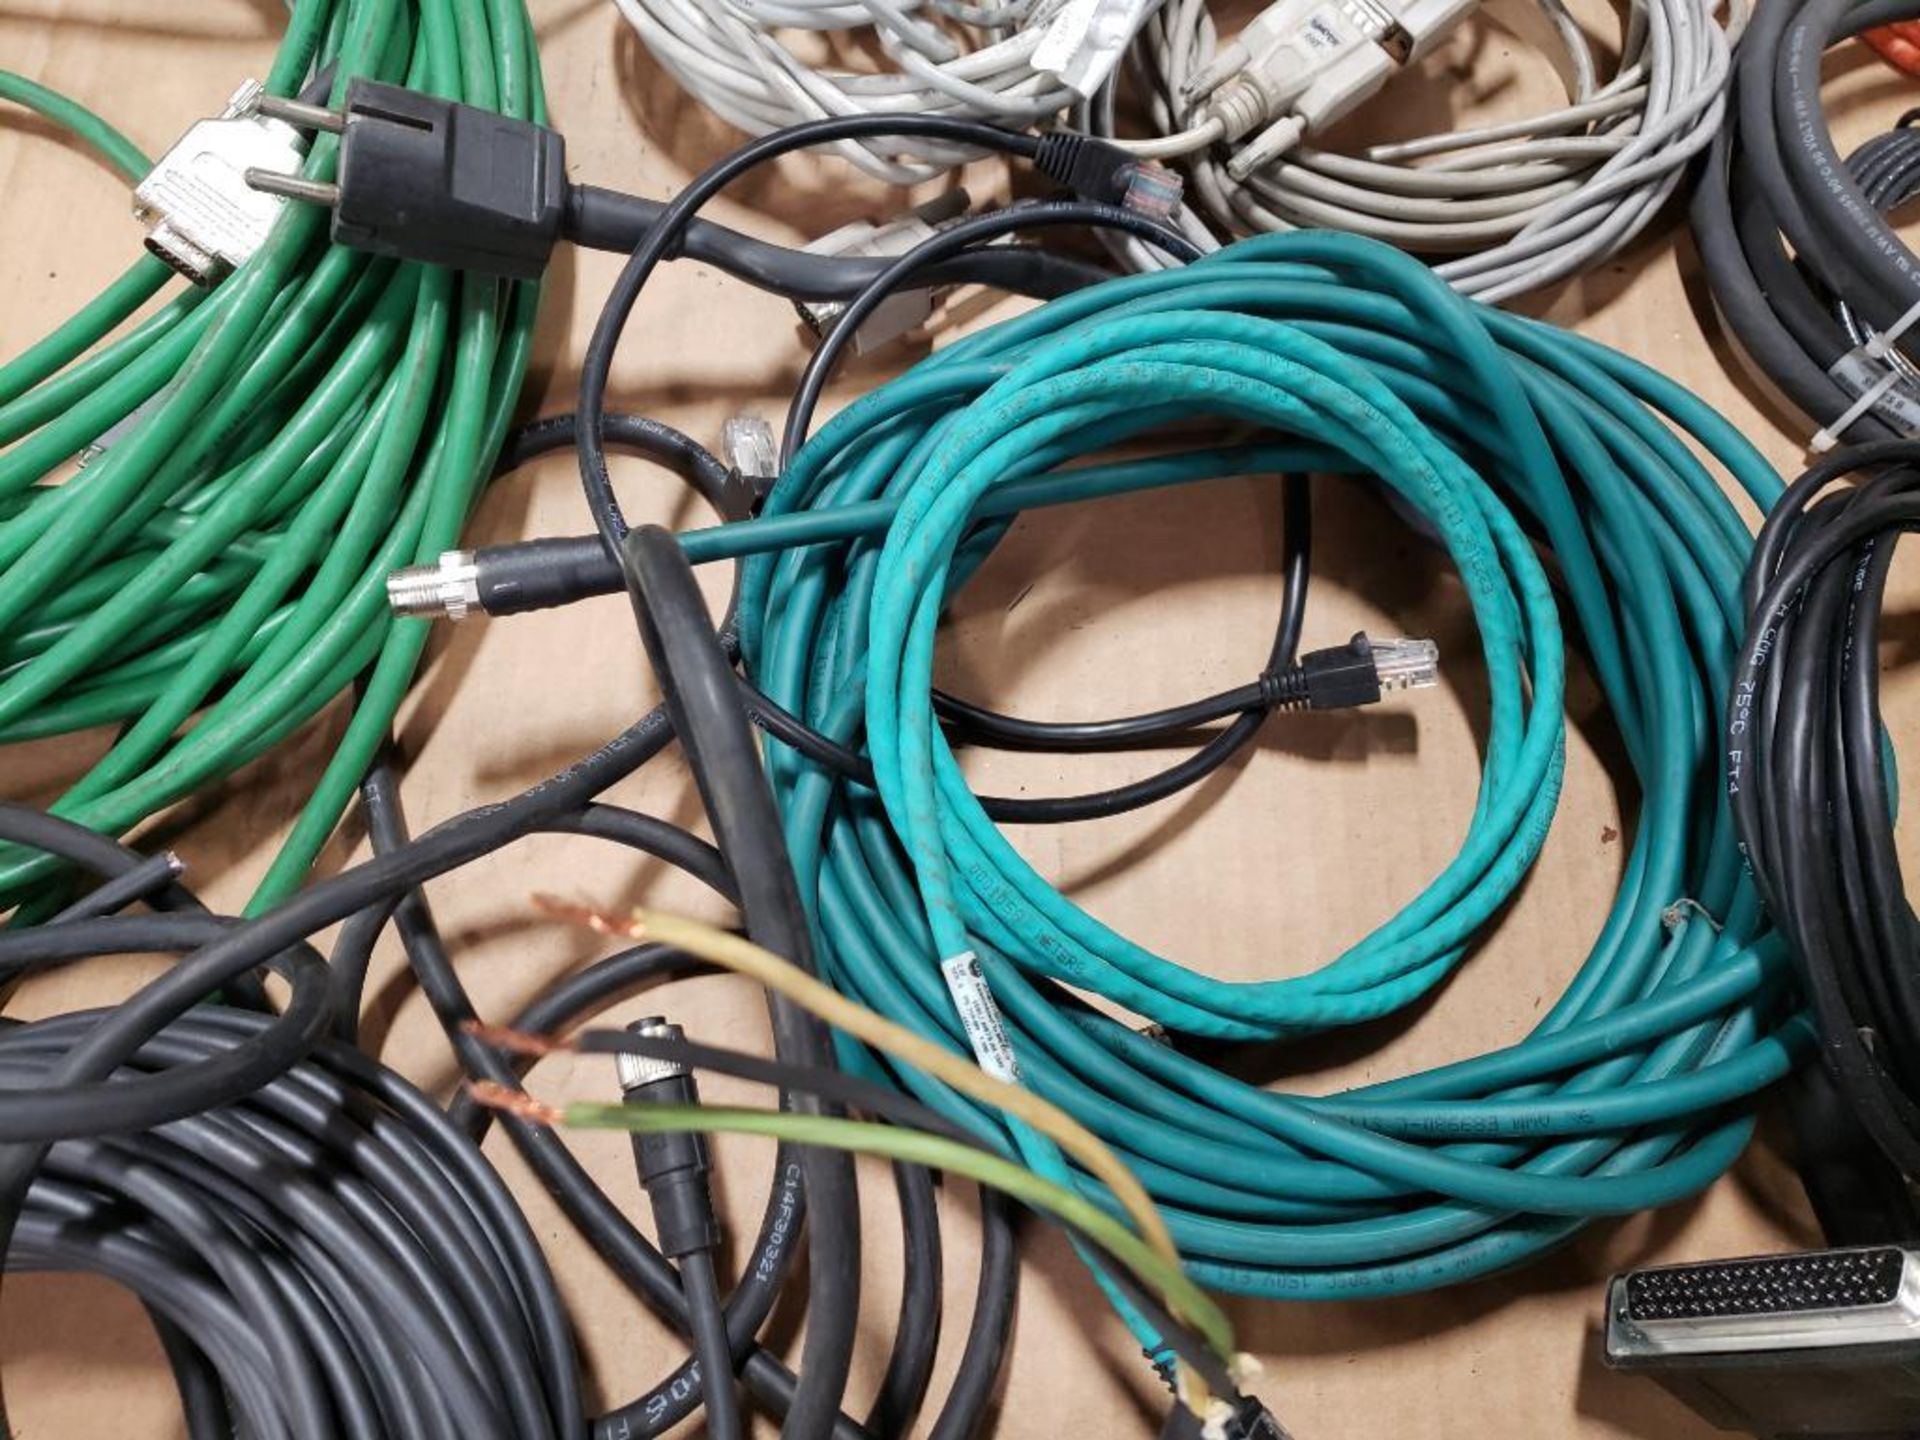 Pallet of assorted electrical connection wires. - Image 7 of 13